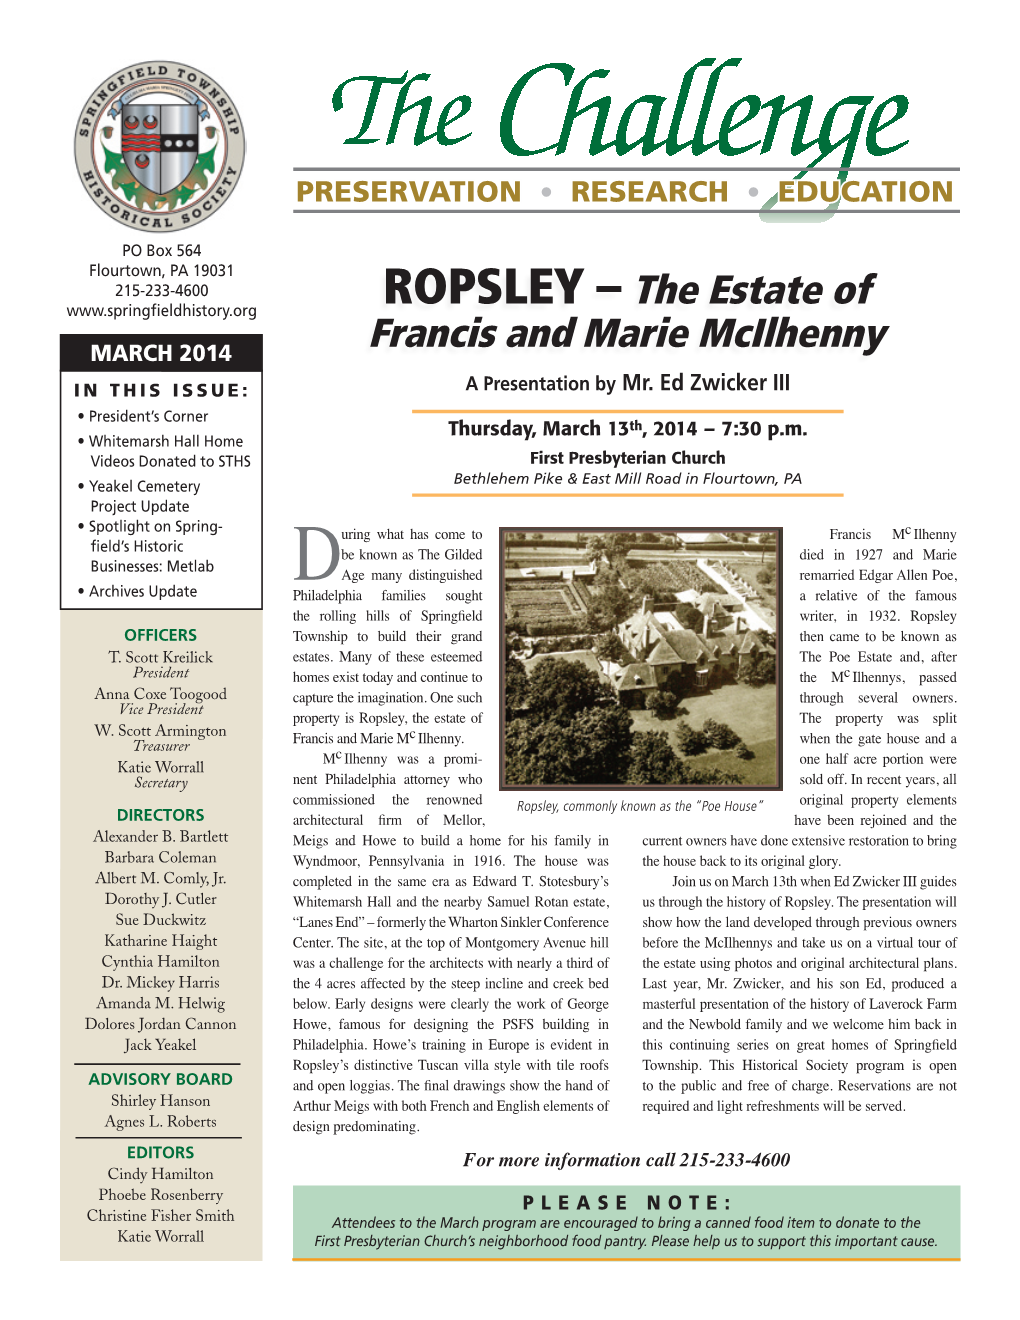 ROPSLEY – the Estate of Francis and Marie Mcilhenny